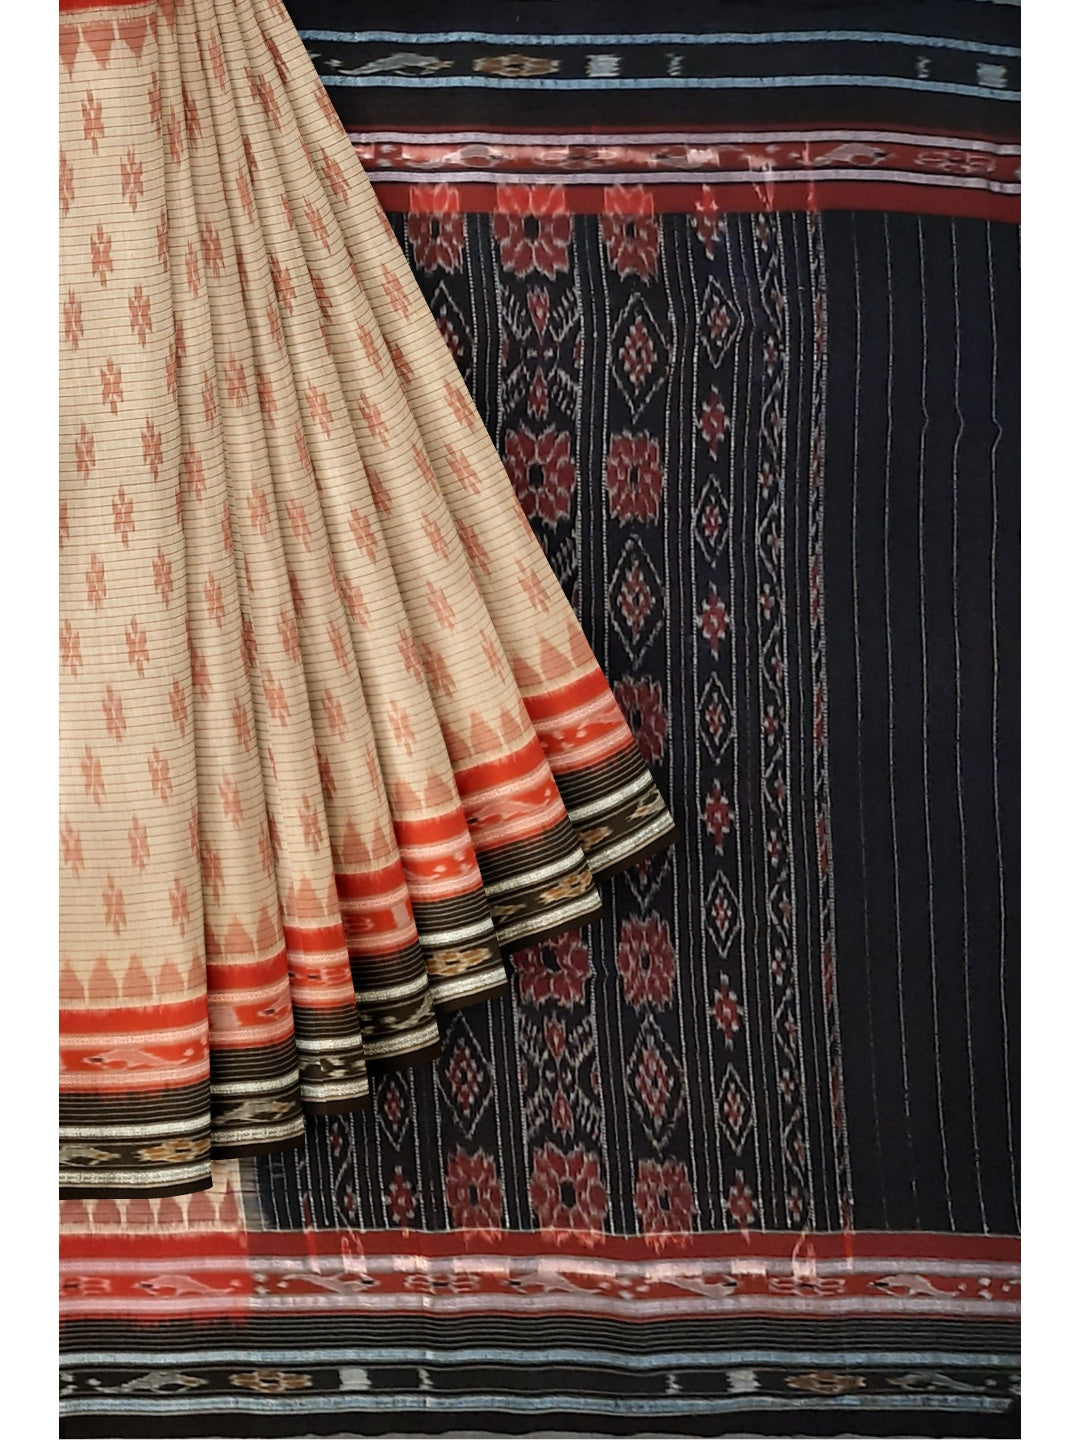 Beige with double border Odisha Ikat saree with cotton ikat blouse piece